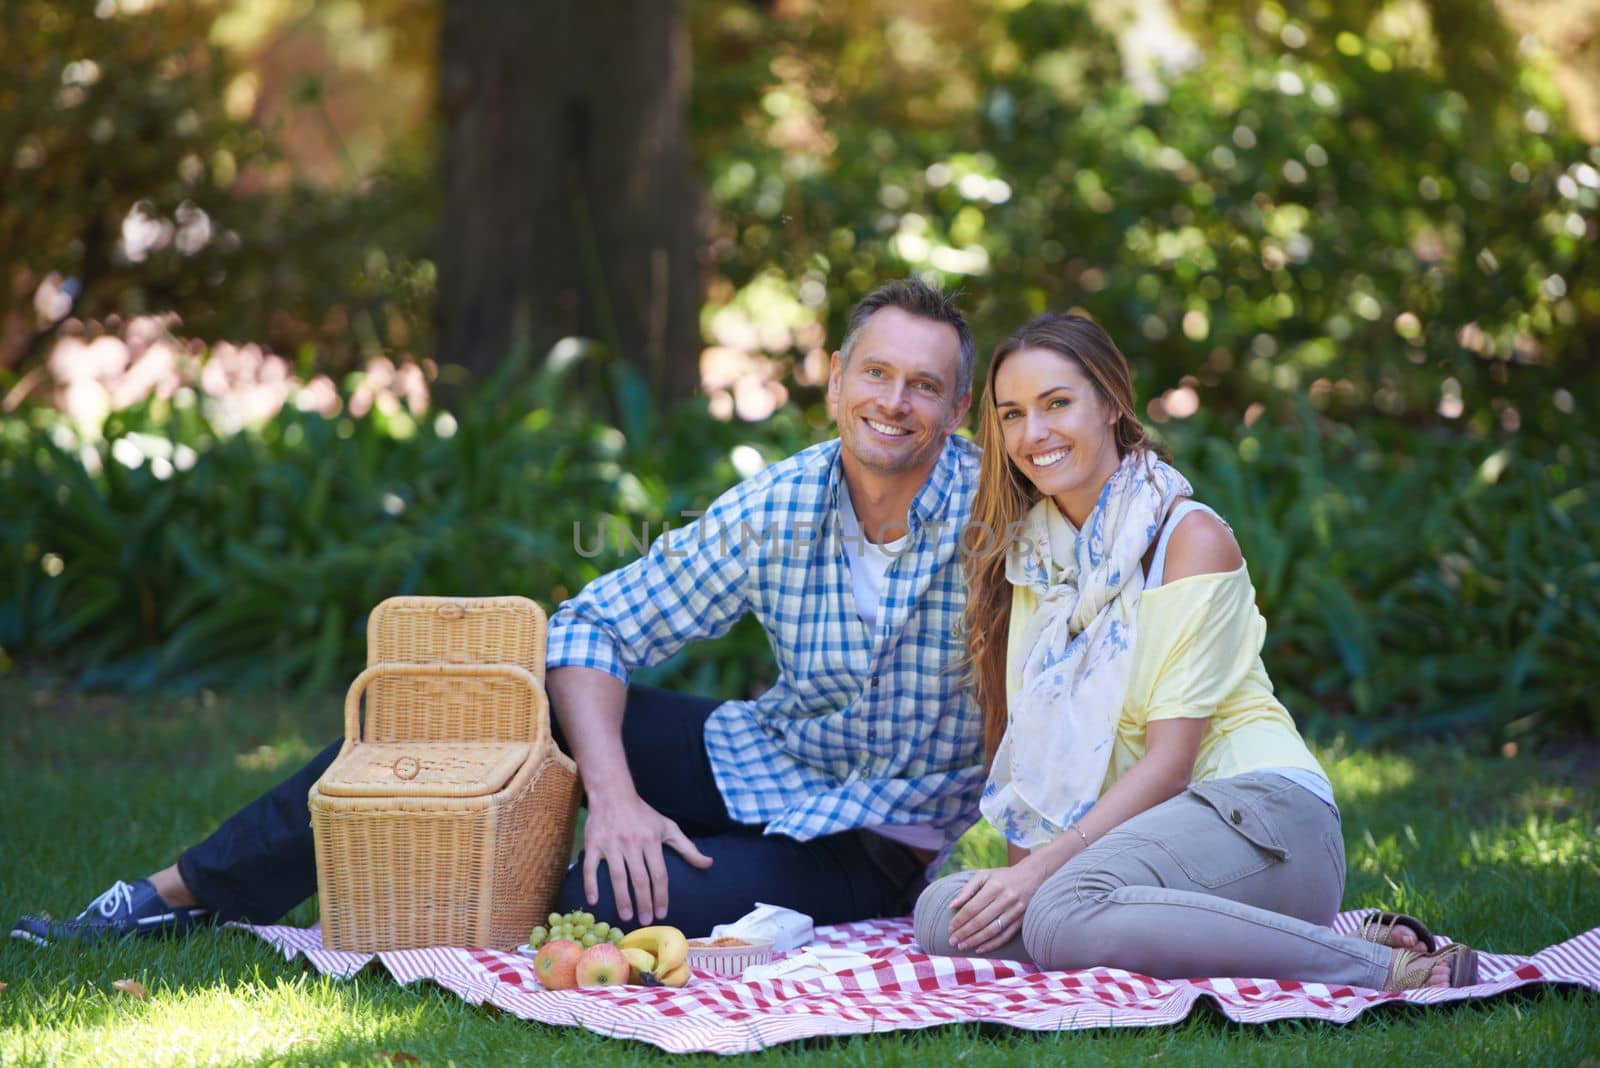 Romance is in the air. A mature couple Portrait of a married couple enjoying a picnic outdoors. by YuriArcurs